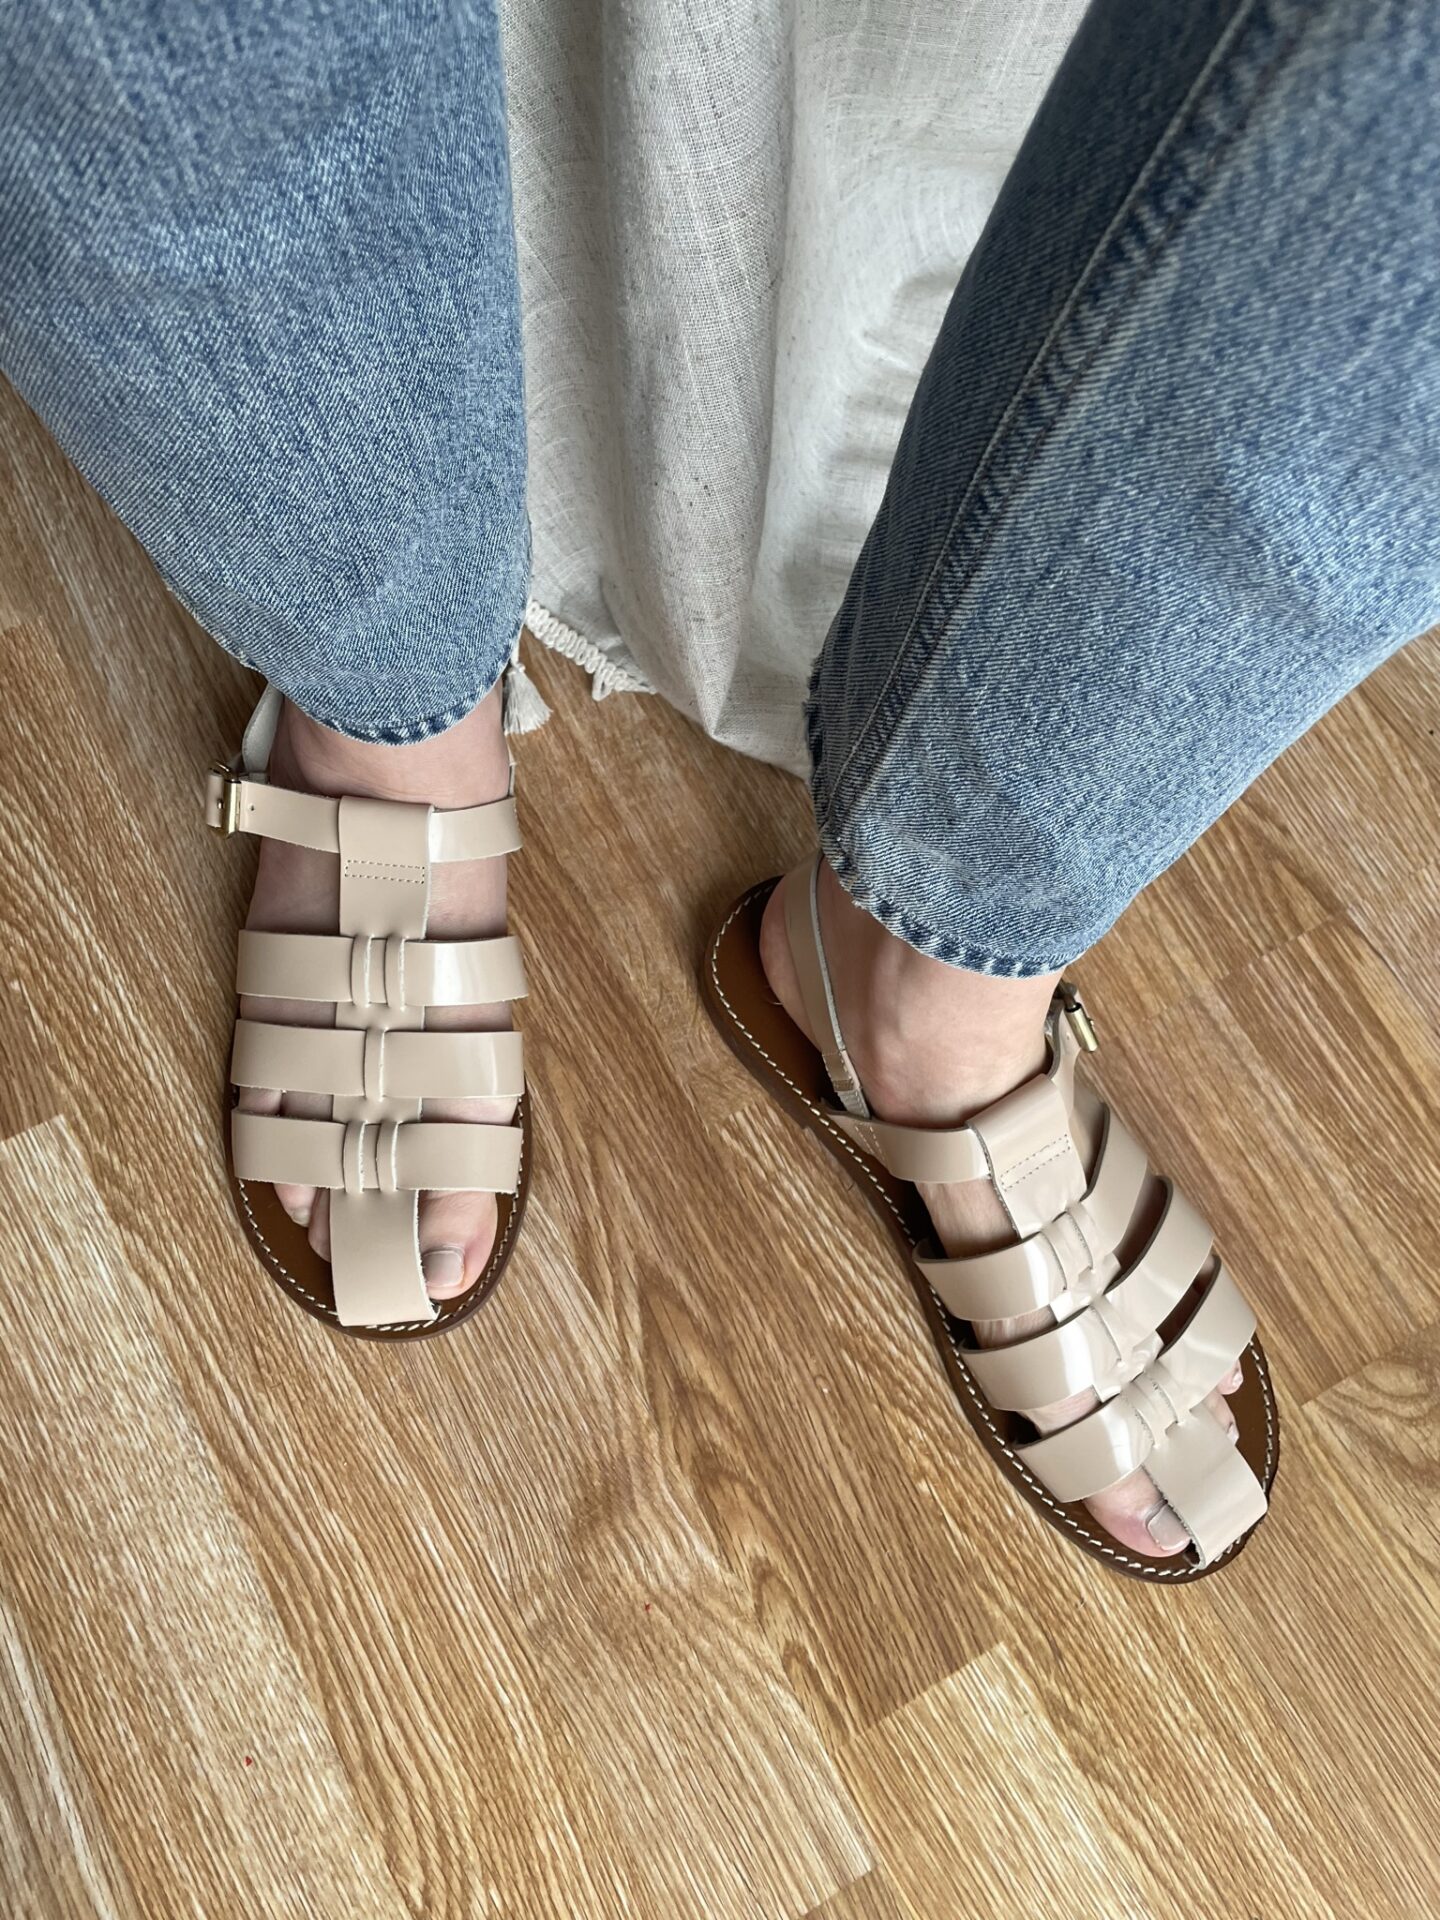 Karin Emily wears a pair of pale pink fisherman sandals from J. Crew